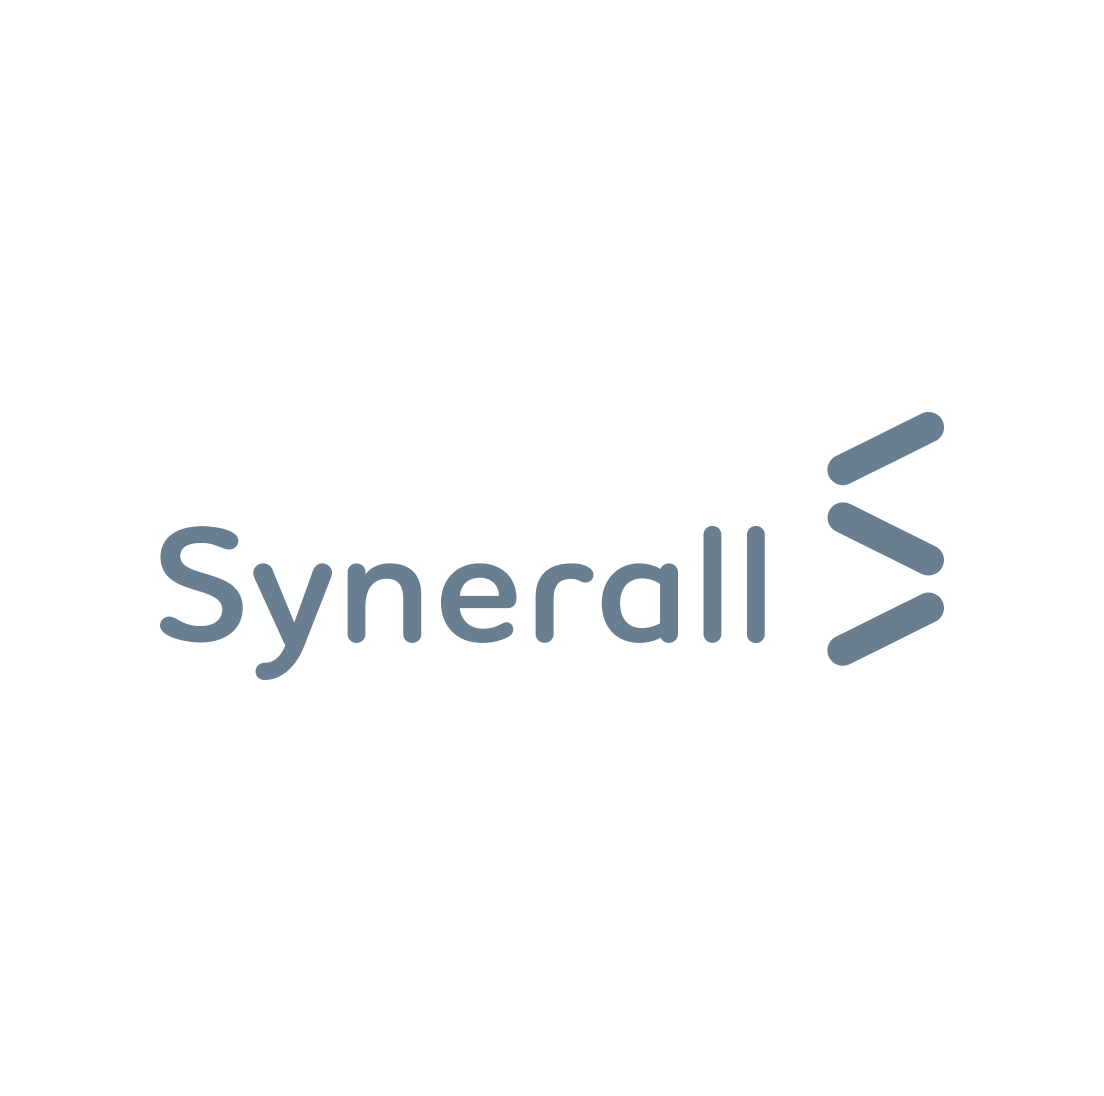 Synerall